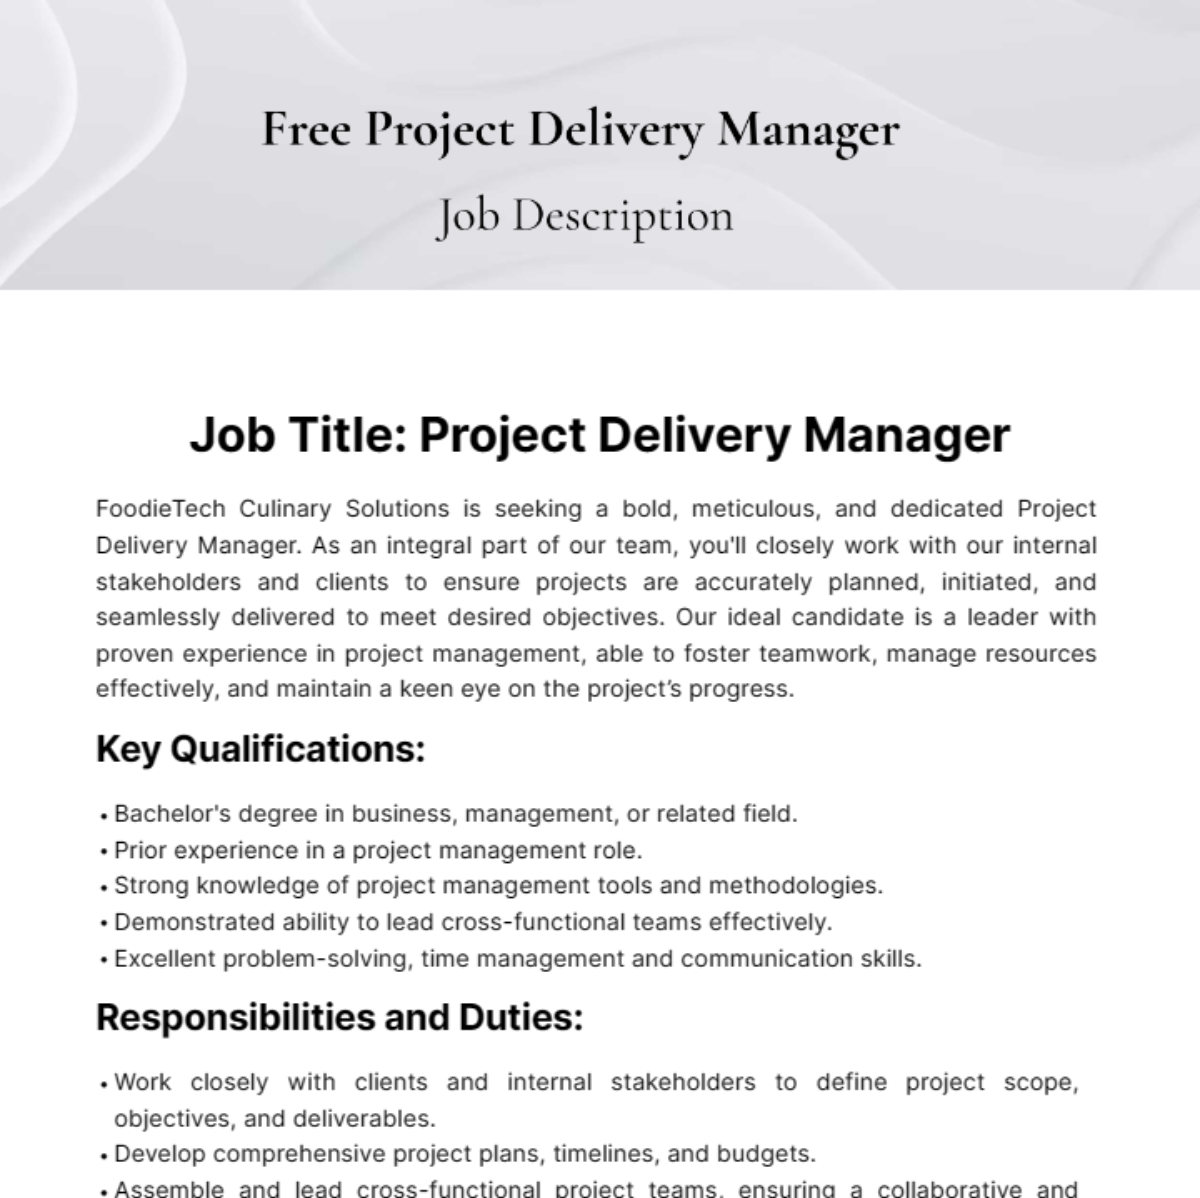 Free Project Delivery Manager Job Description Template